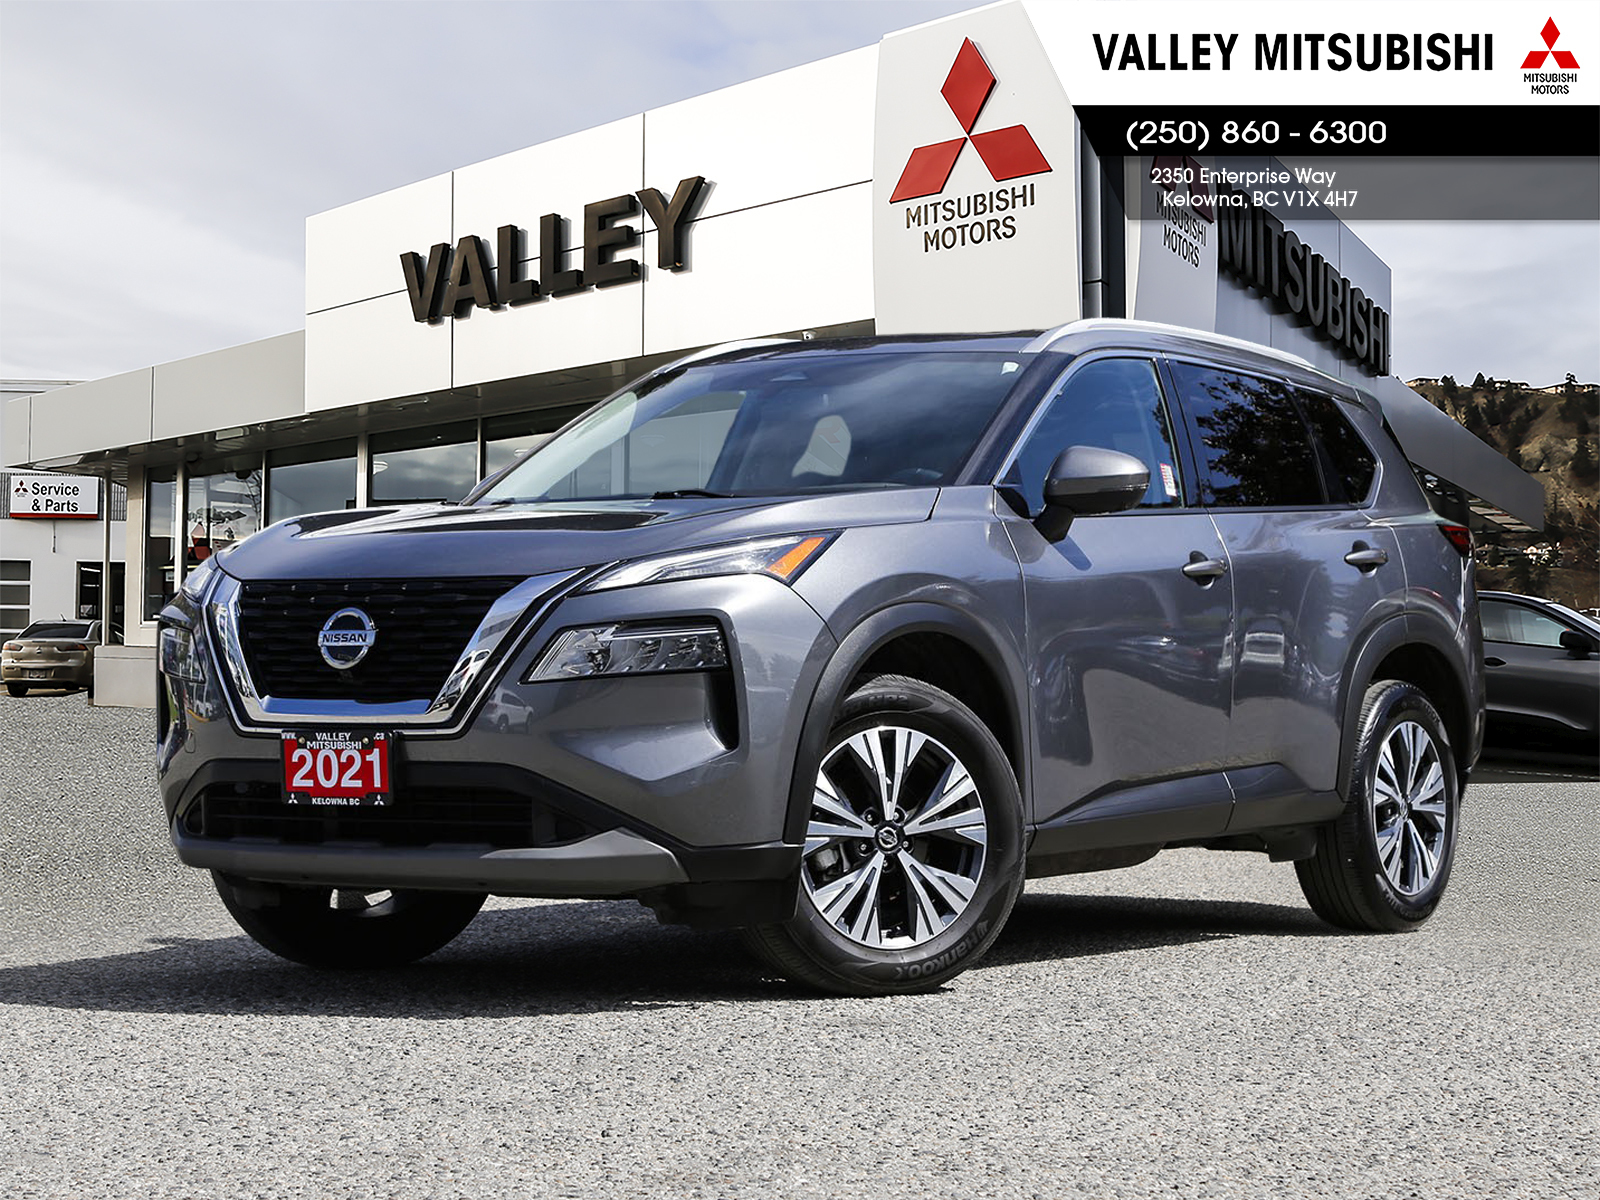 2021 Nissan Rogue SV PREMIUM, LEATHER, ROOF, CAMERA, POWER SEAT